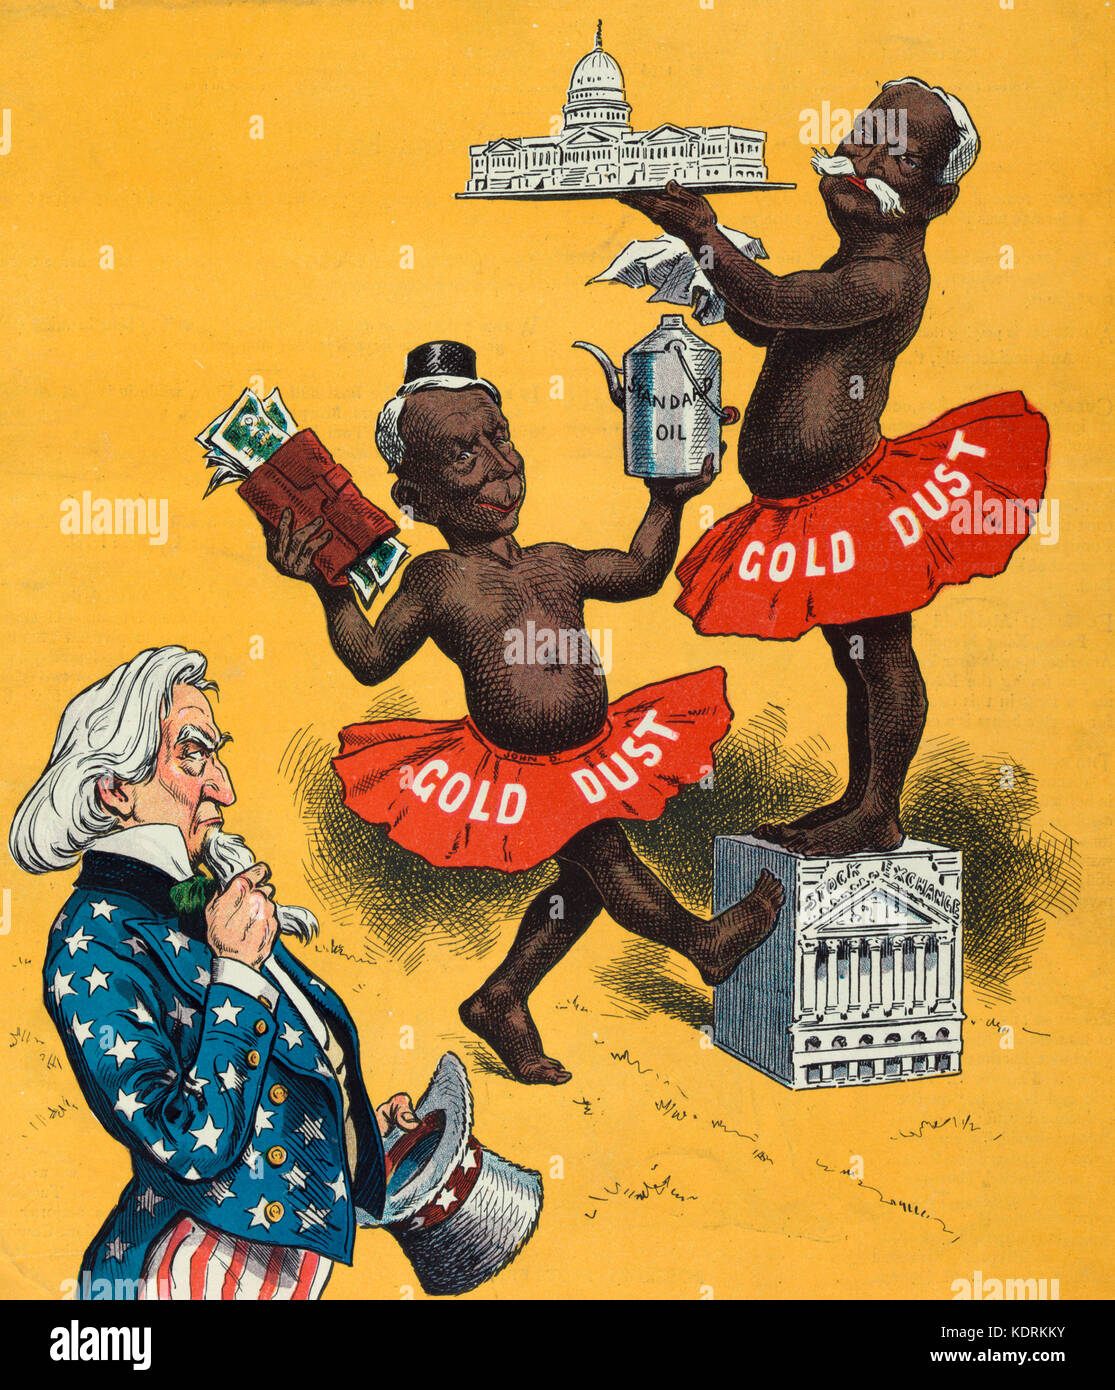 'Let the gold dust twins do your work' -  Illustration shows Nelson Aldrich and John D. Rockefeller as dark-skinned men wearing skirts labeled 'Gold Dust'; Aldrich is standing on top of a replica of a building labeled 'Stock Exchange' and holding up a replica of the U.S. Capitol building, Rockefeller is standing on the ground next to him, holding up an oil can labeled 'Standard Oil' and a wallet stuffed with money. Uncle Sam is standing to the left, in the foreground, stroking his beard, with a concerned look on his face. Political Cartoon, 1905 Stock Photo